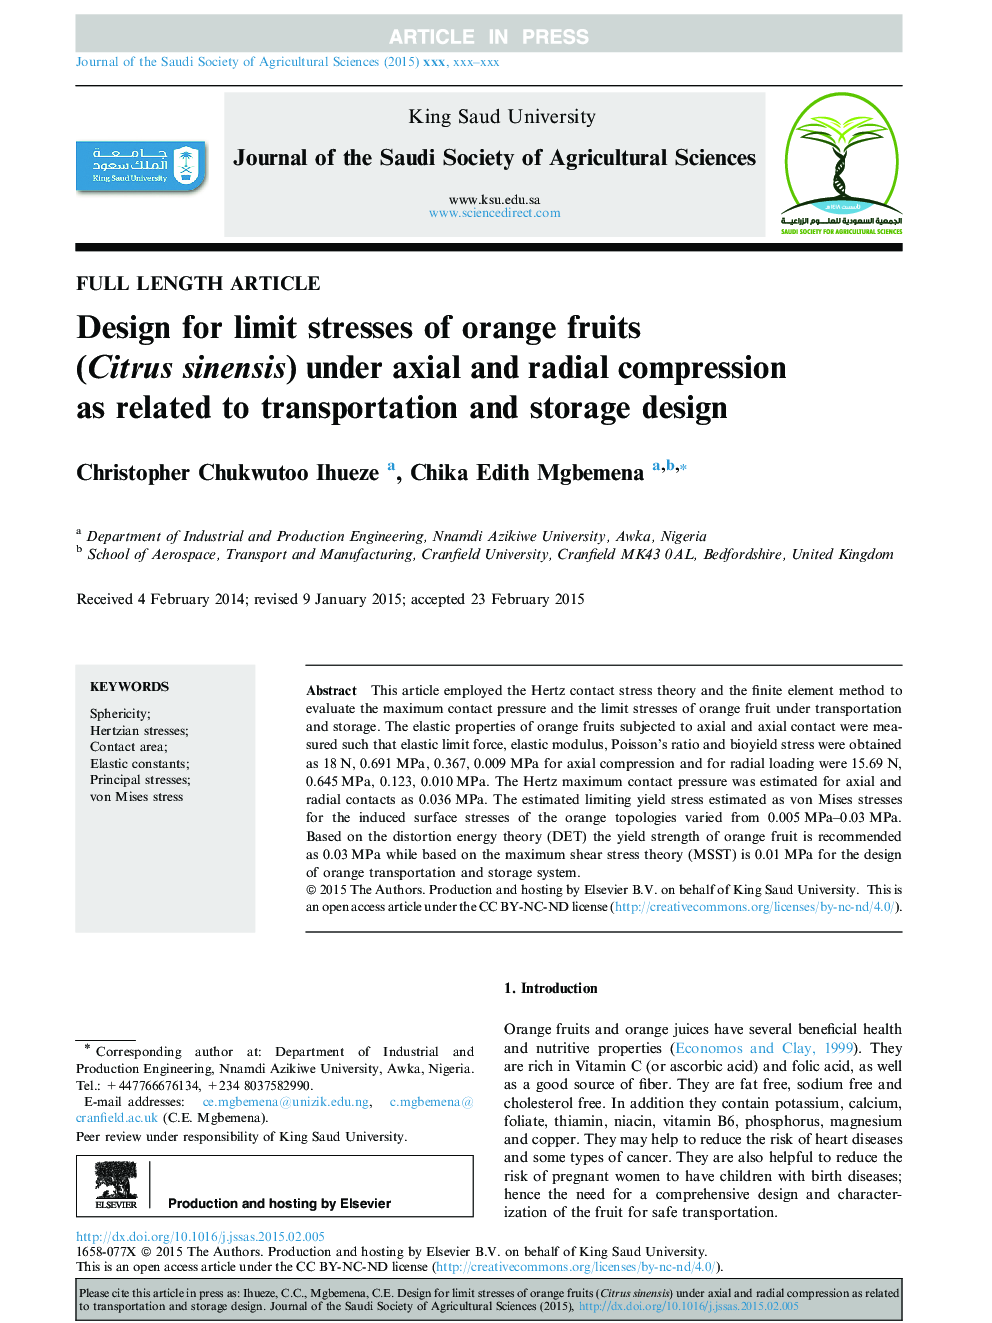 Design for limit stresses of orange fruits (Citrus sinensis) under axial and radial compression as related to transportation and storage design